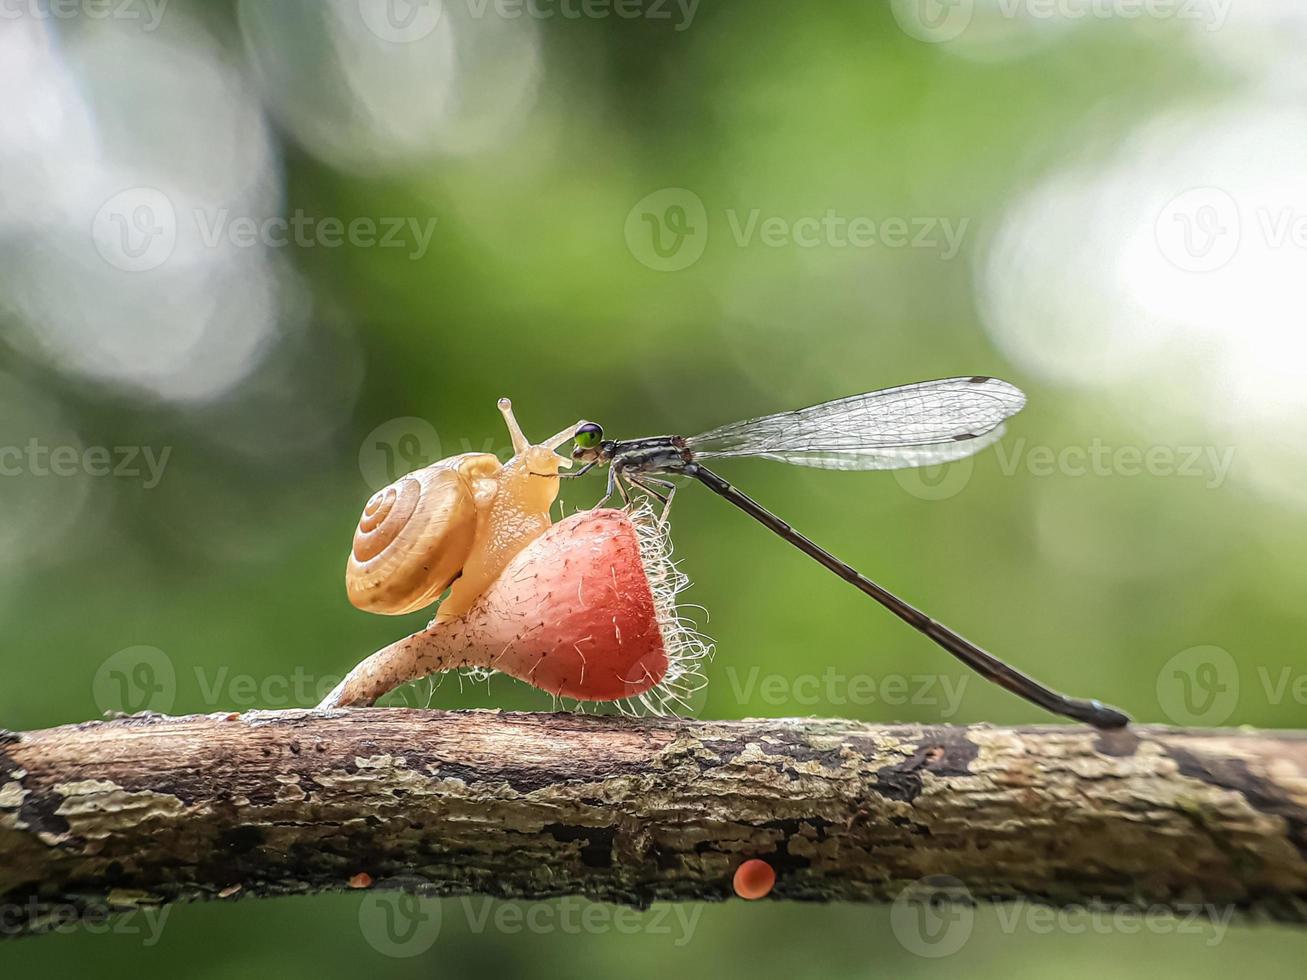 Snails on mushrooms and dragonflies against a natural background photo